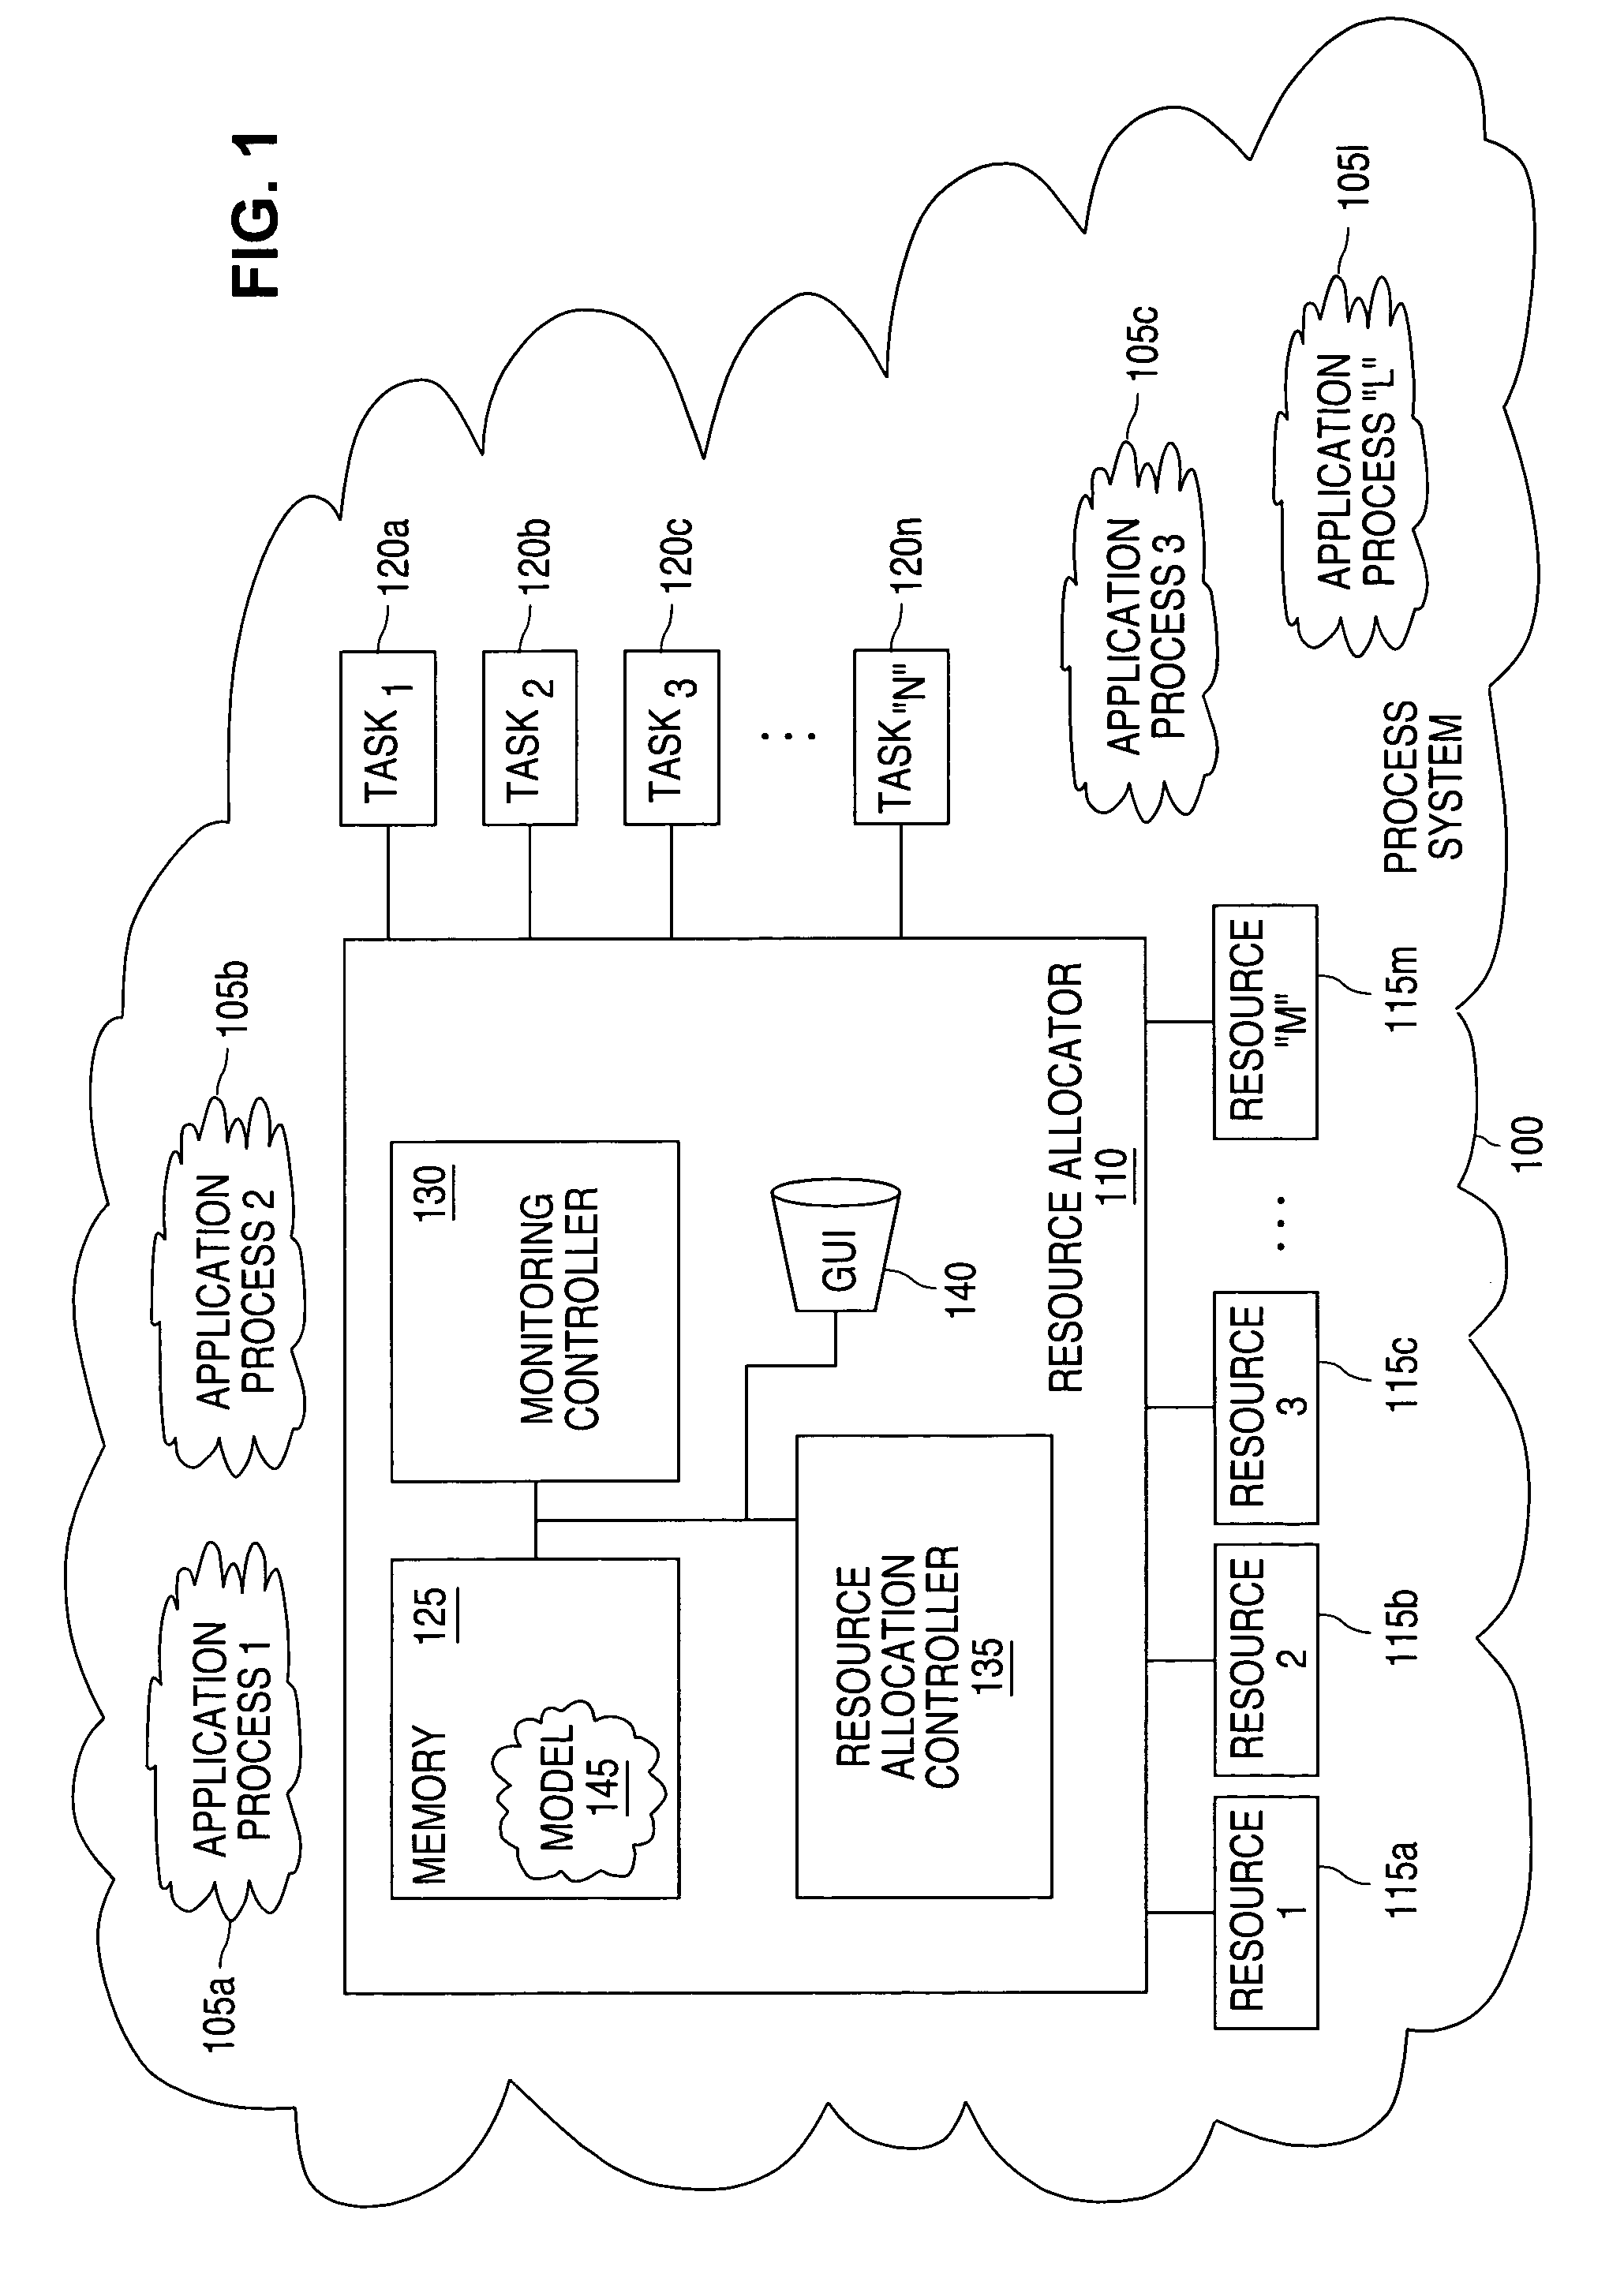 Graphical user interface for compliance monitoring in semiconductor wafer fabrication and method of operation